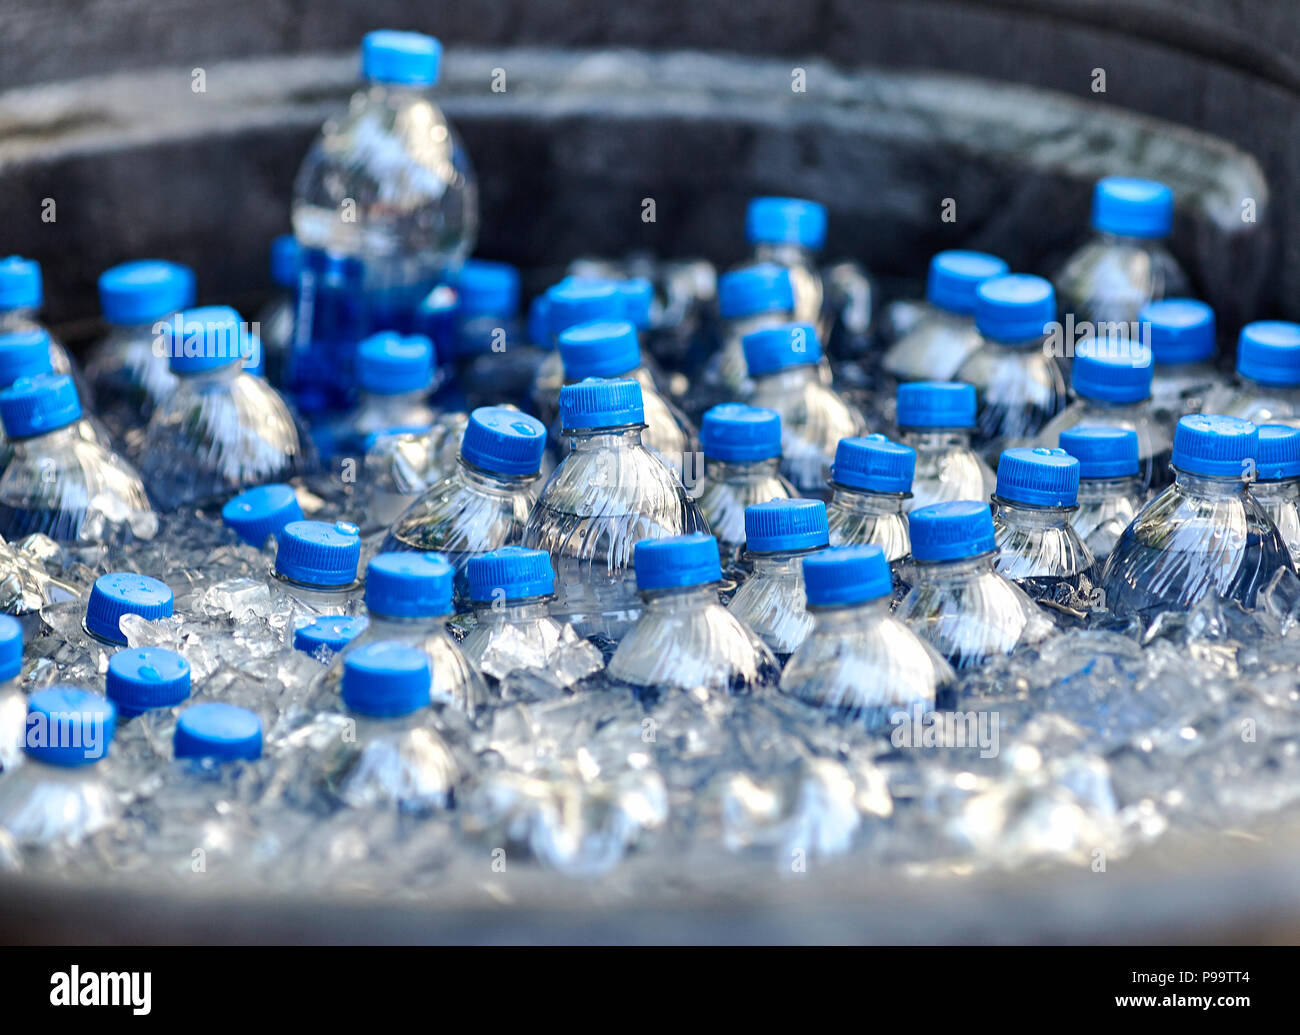 Plastic bottles of drinking water with blue caps floating in ice in a barrel Stock Photo